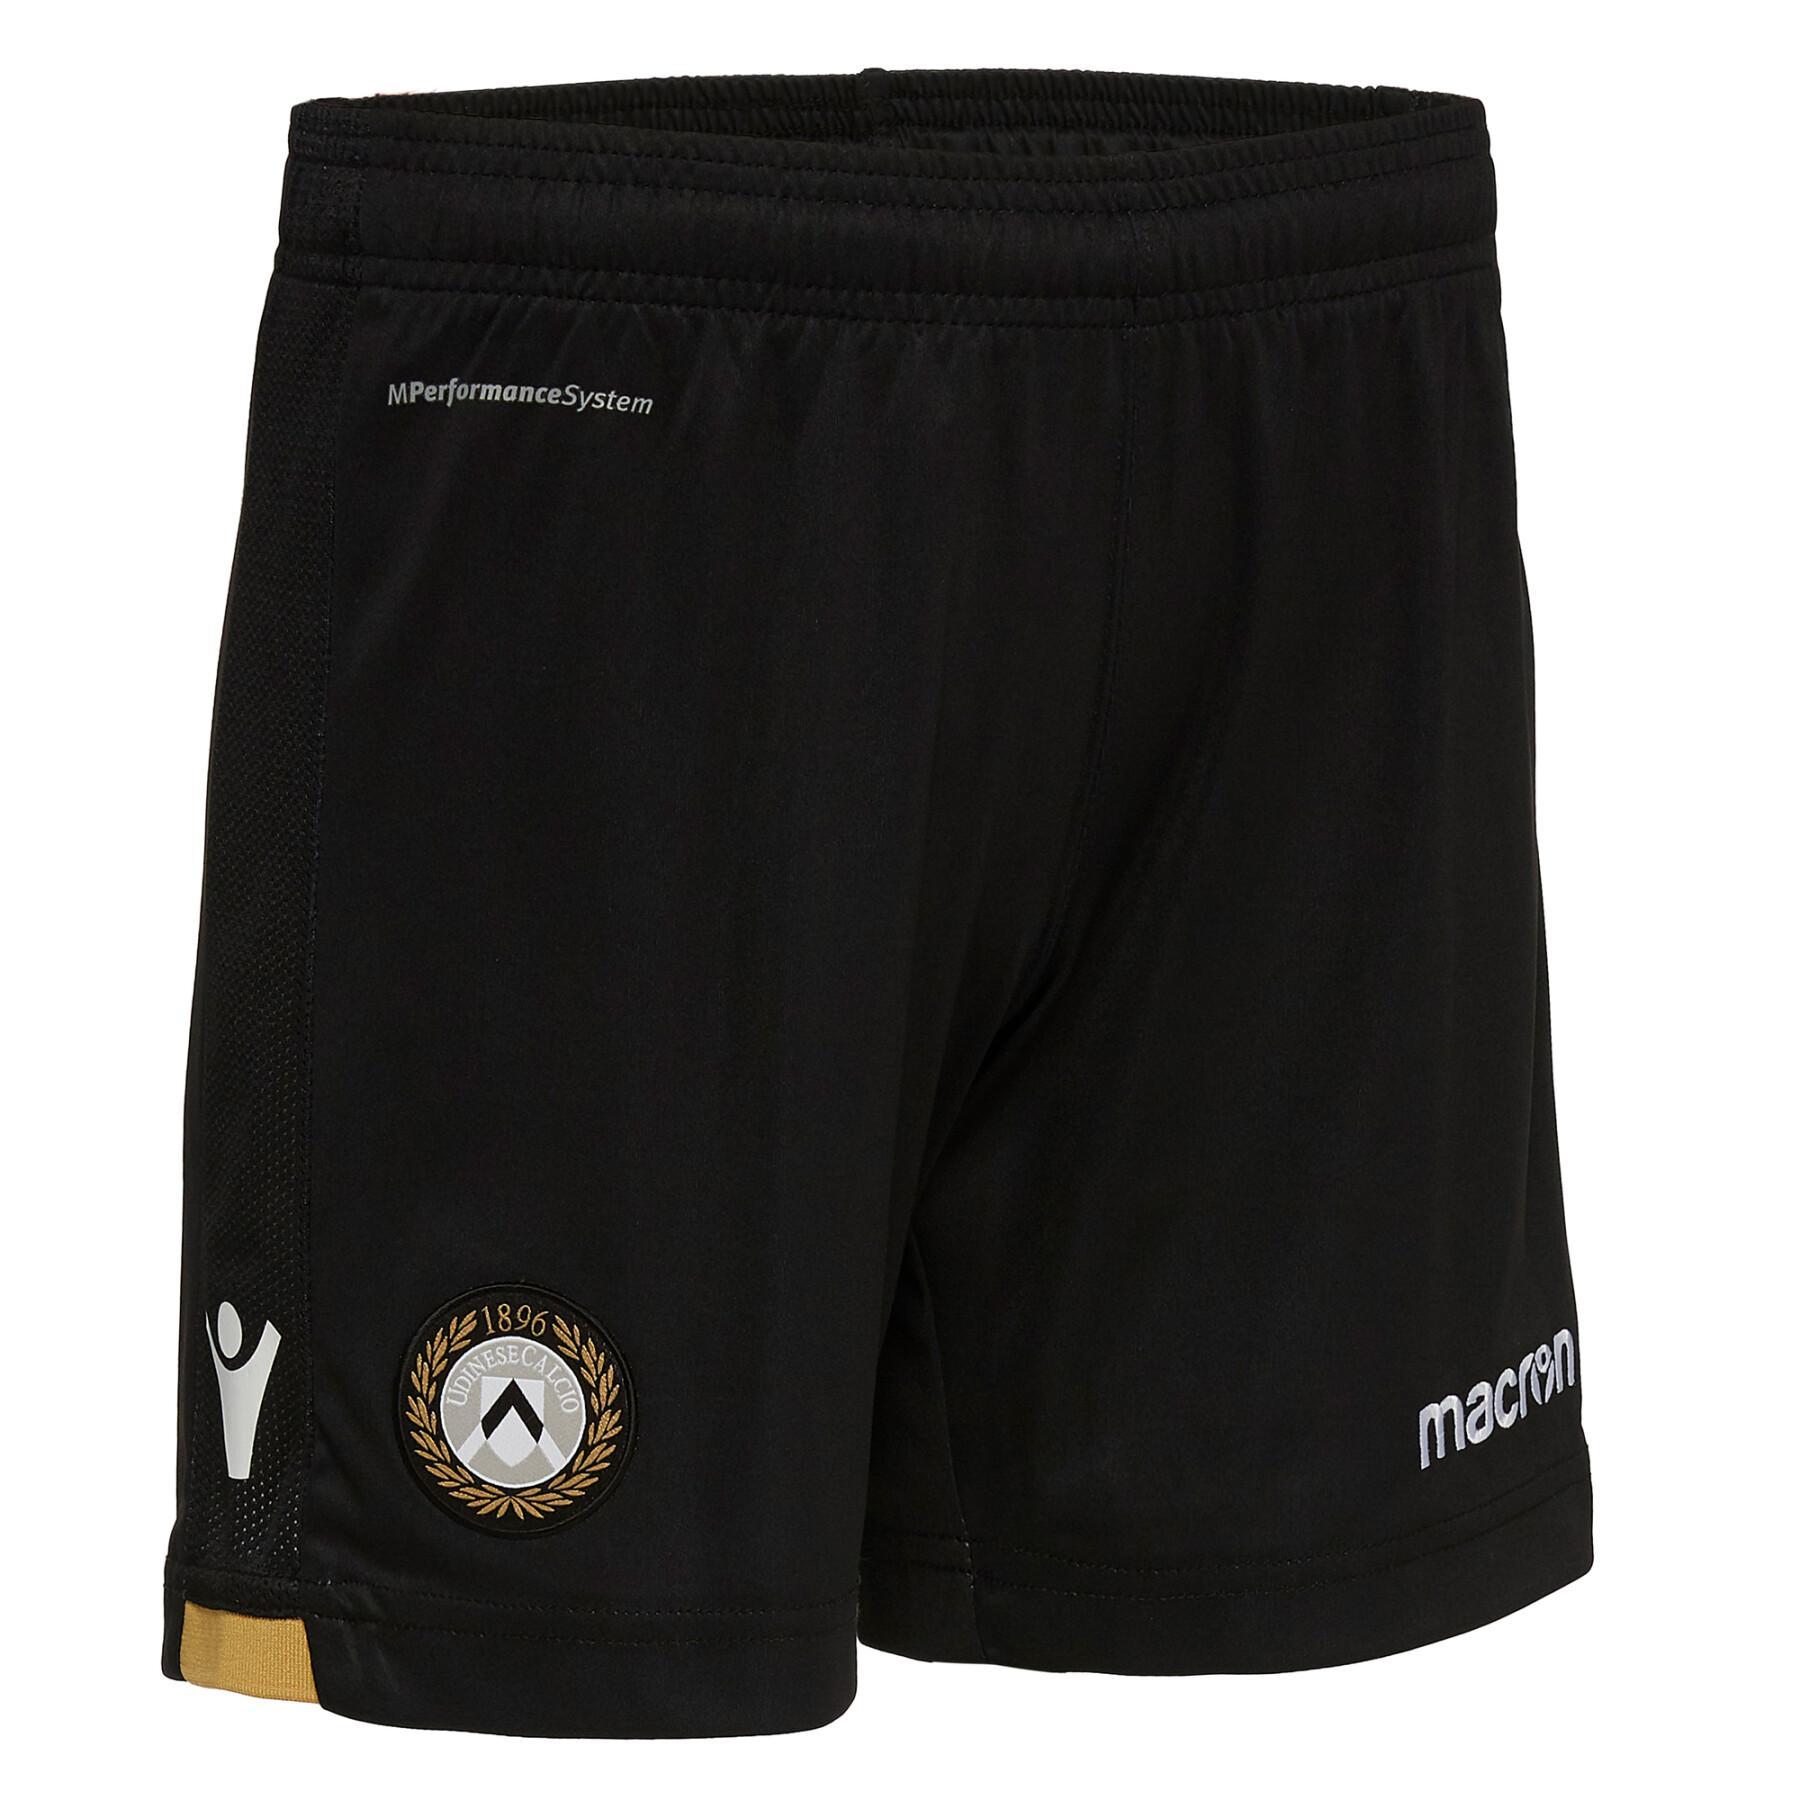 Short thuis kind Udinese 2018/19